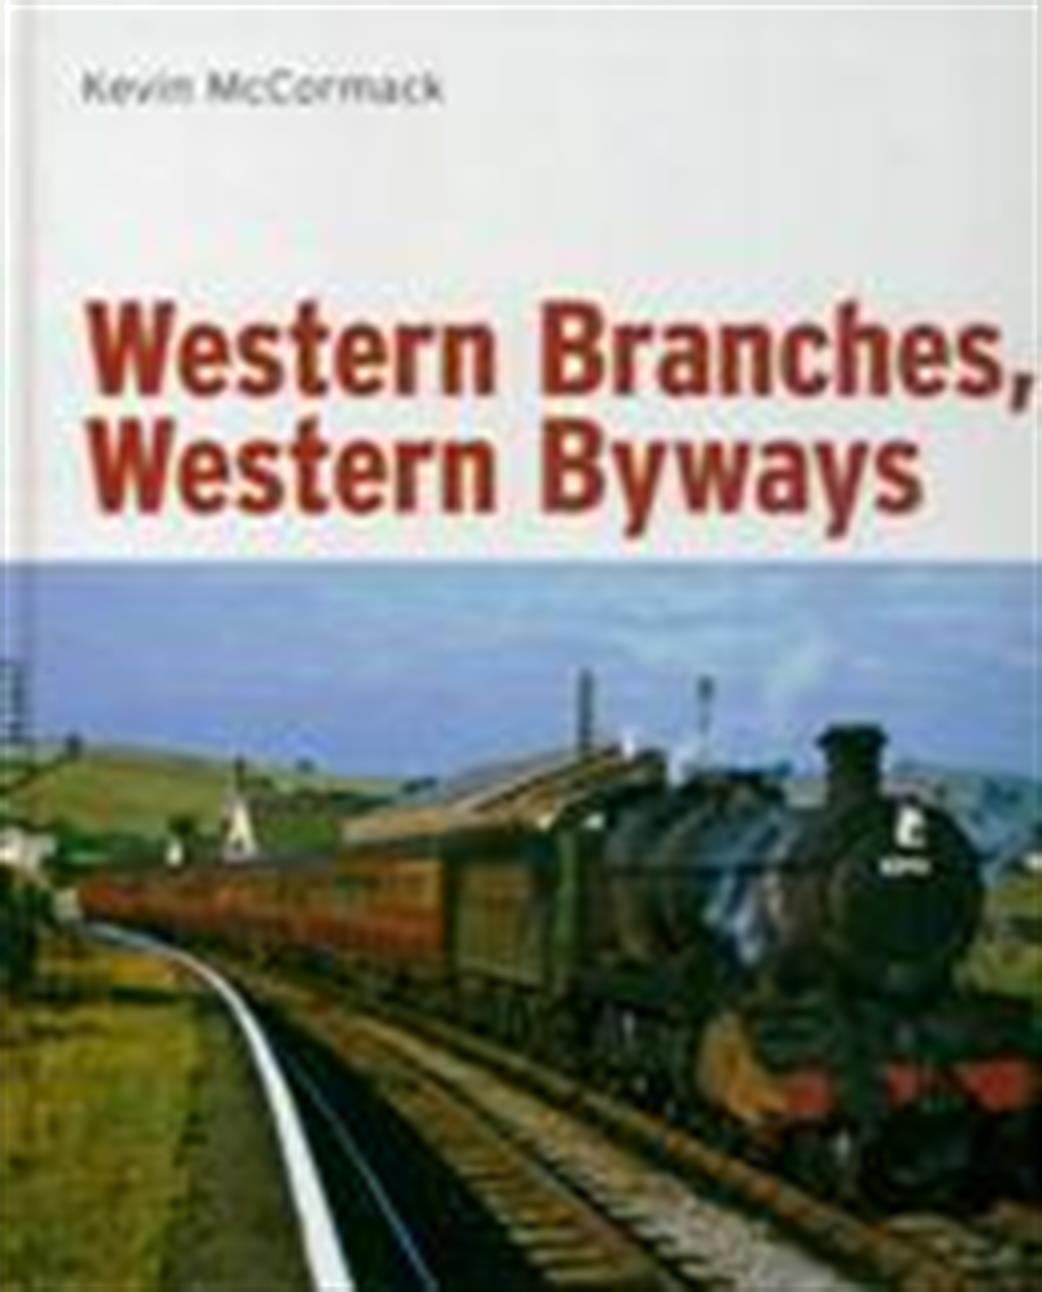 Ian Allan Publishing  9780711037649 Western Branches Western Byways by Kevin McCormack